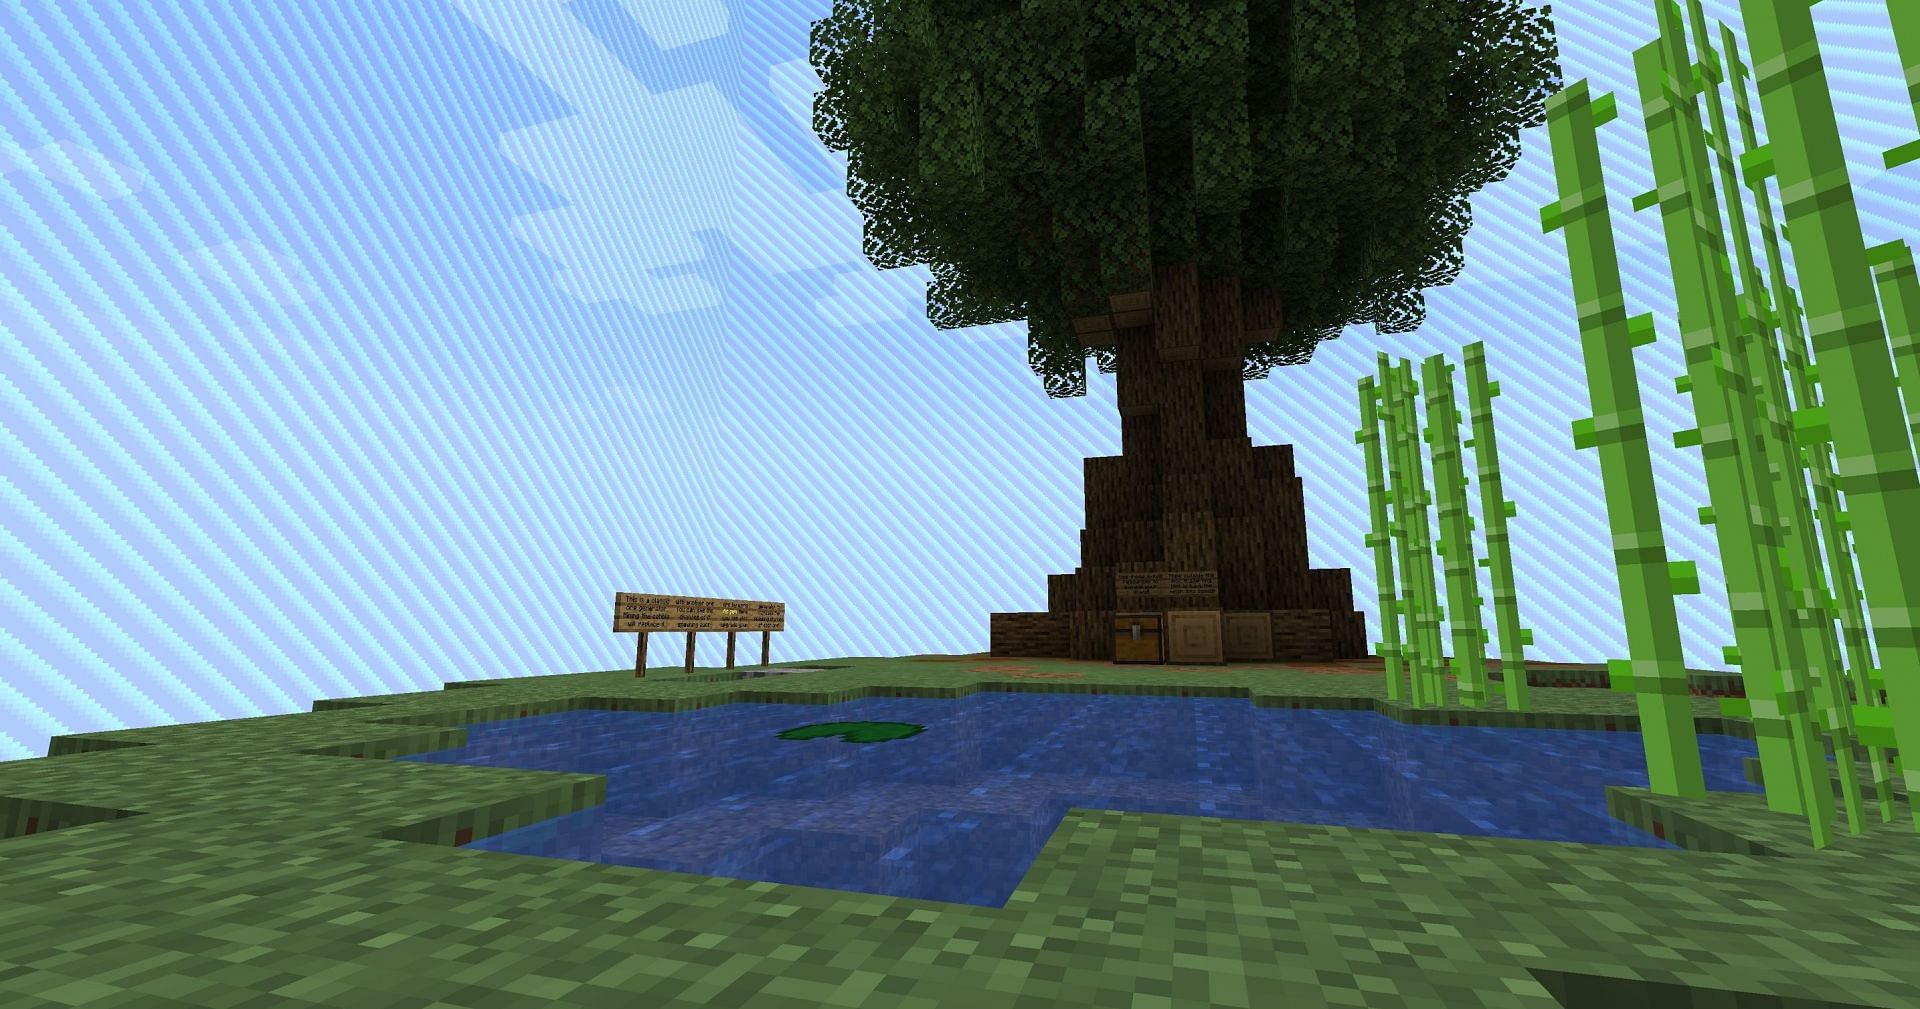 InsanityCraft is a fun server network with many different game modes to try (Image via Mojang)